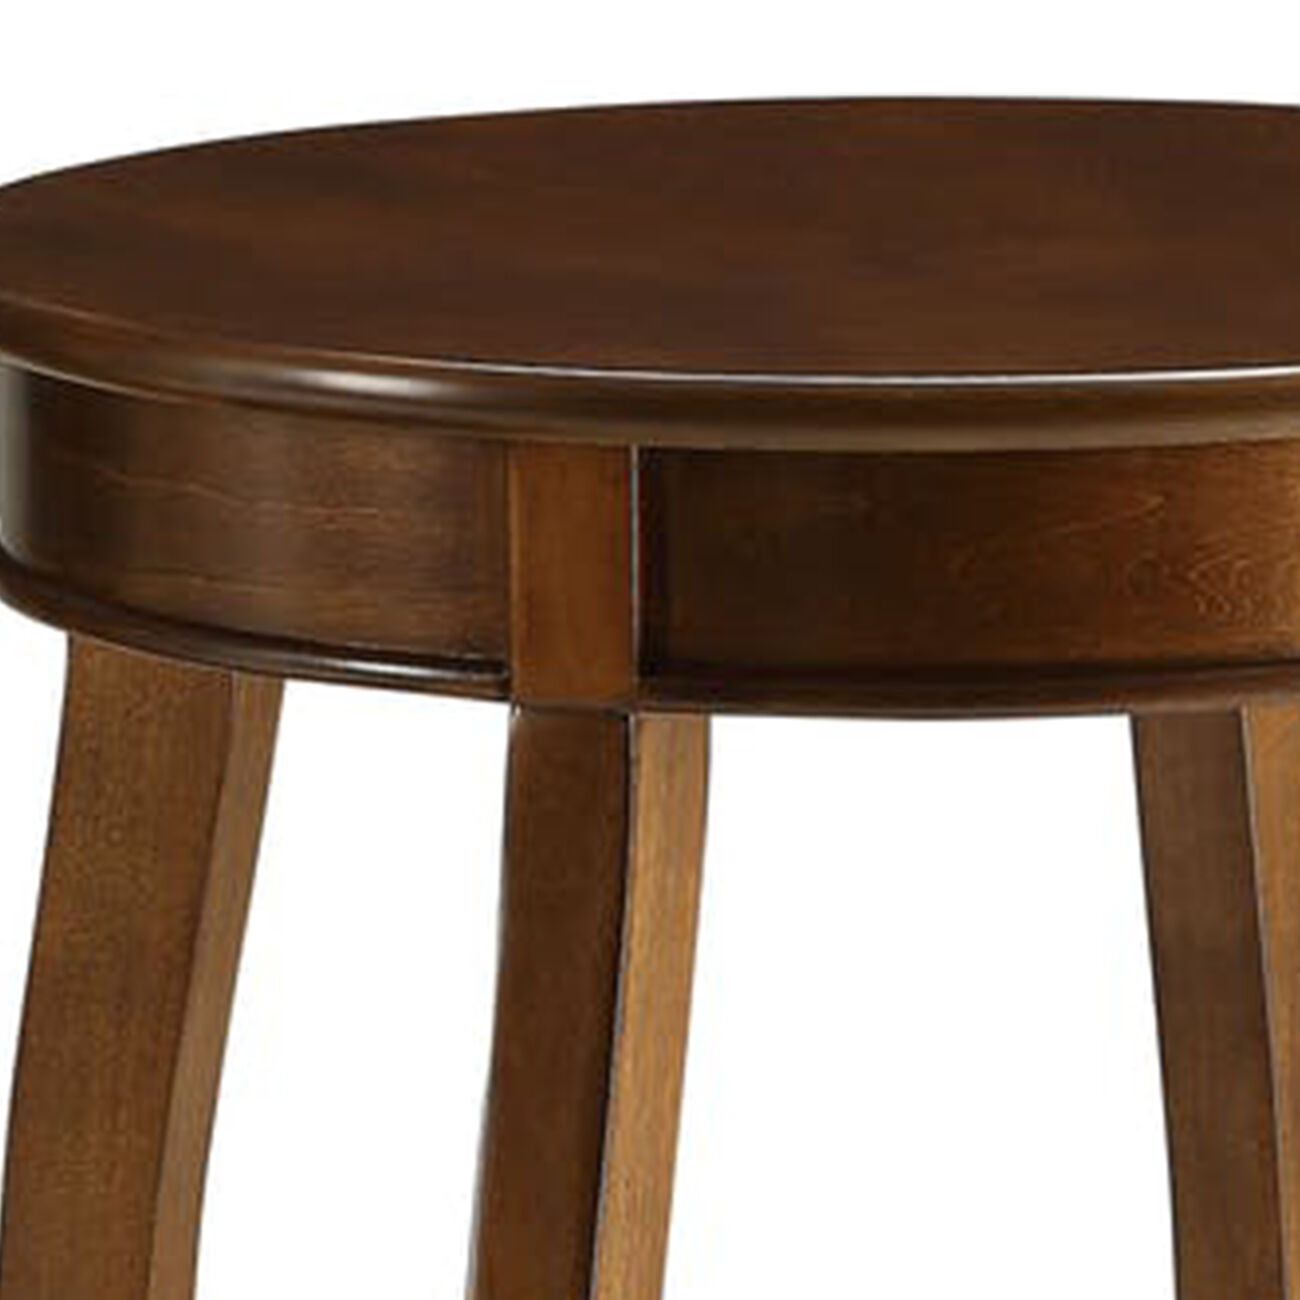 Amiable Side Table, Walnut brown